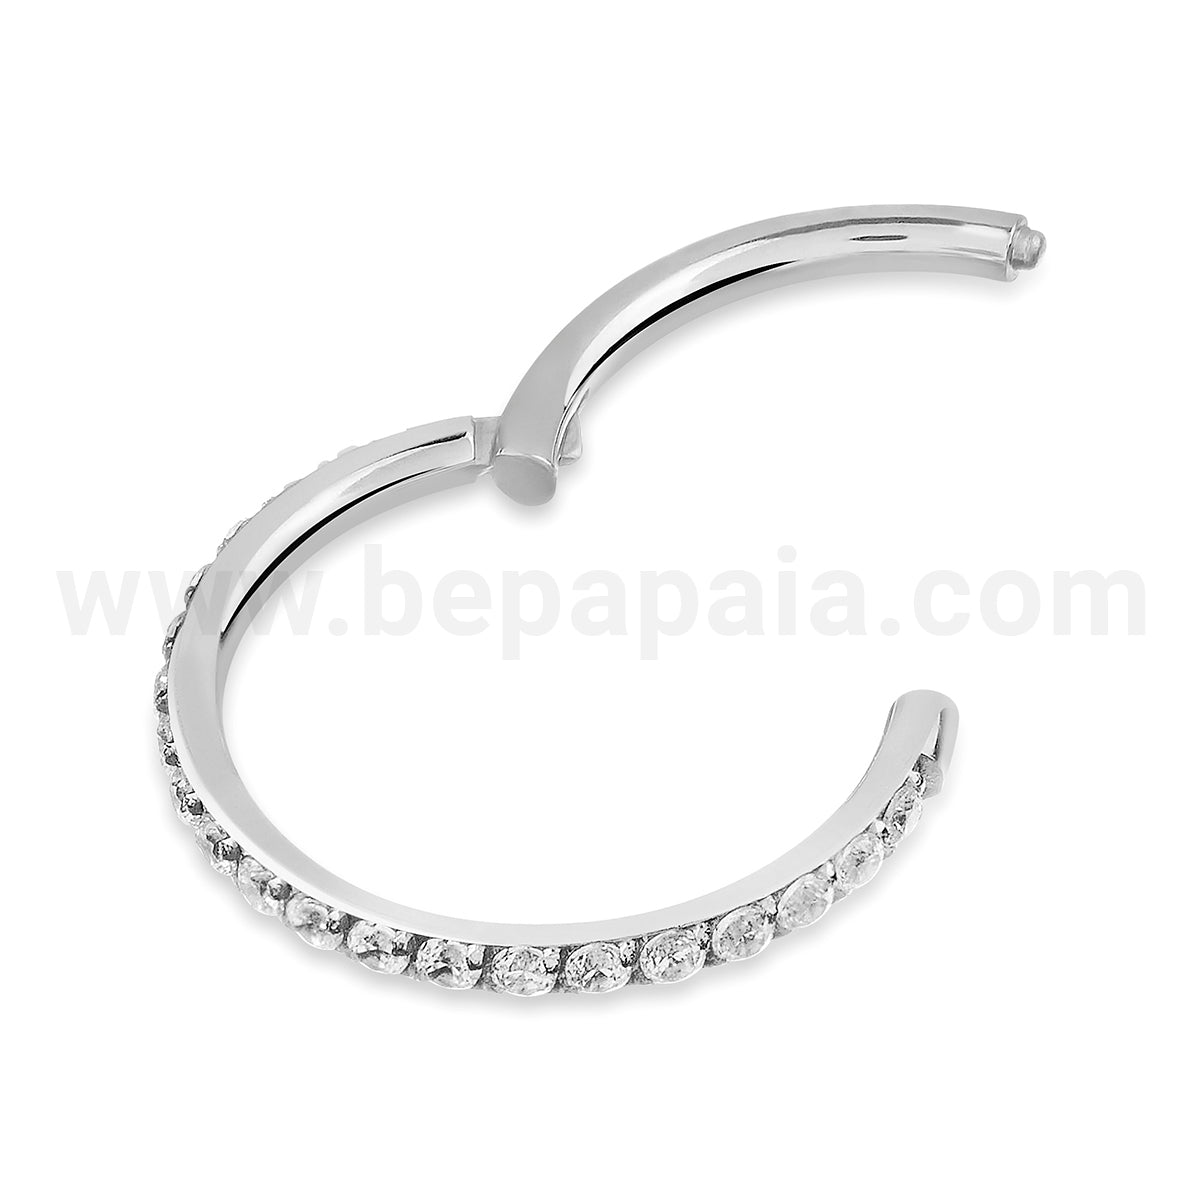 Nose and ear segment ring piercing 1.0 mm